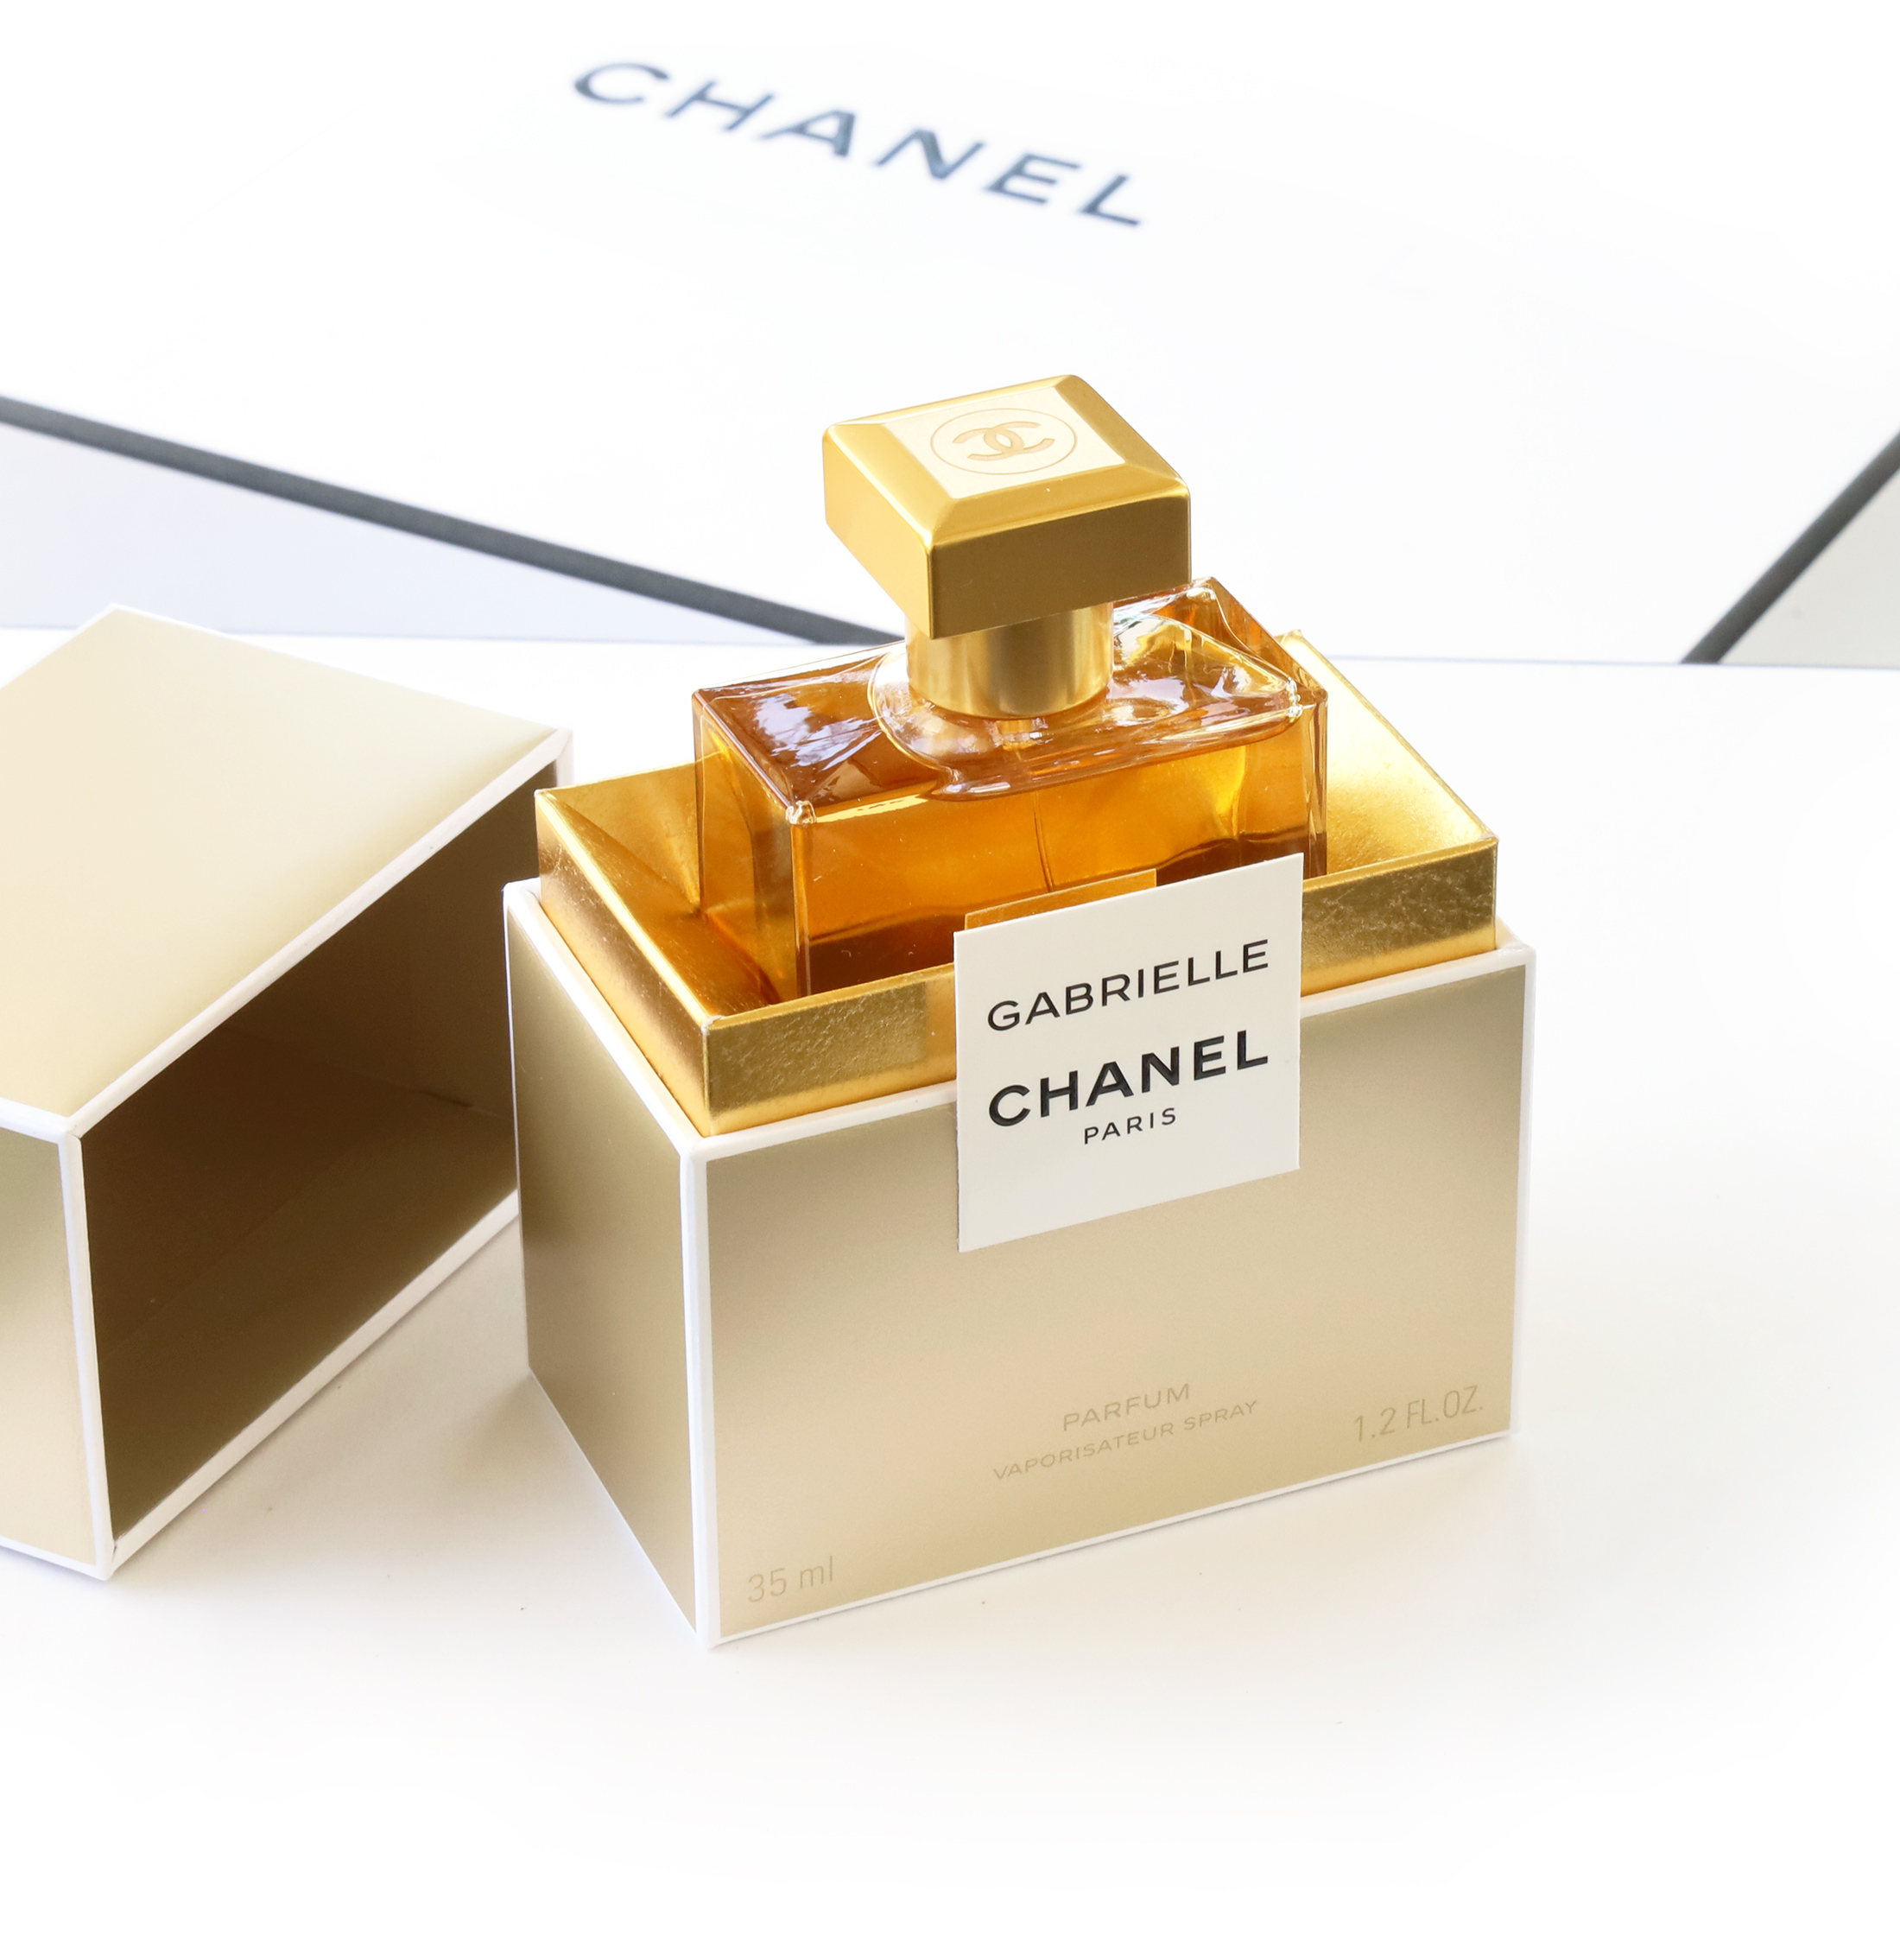 Comparative Review of Gabrielle Chanel Parfum, the Original and Essence ~  Fragrance Reviews